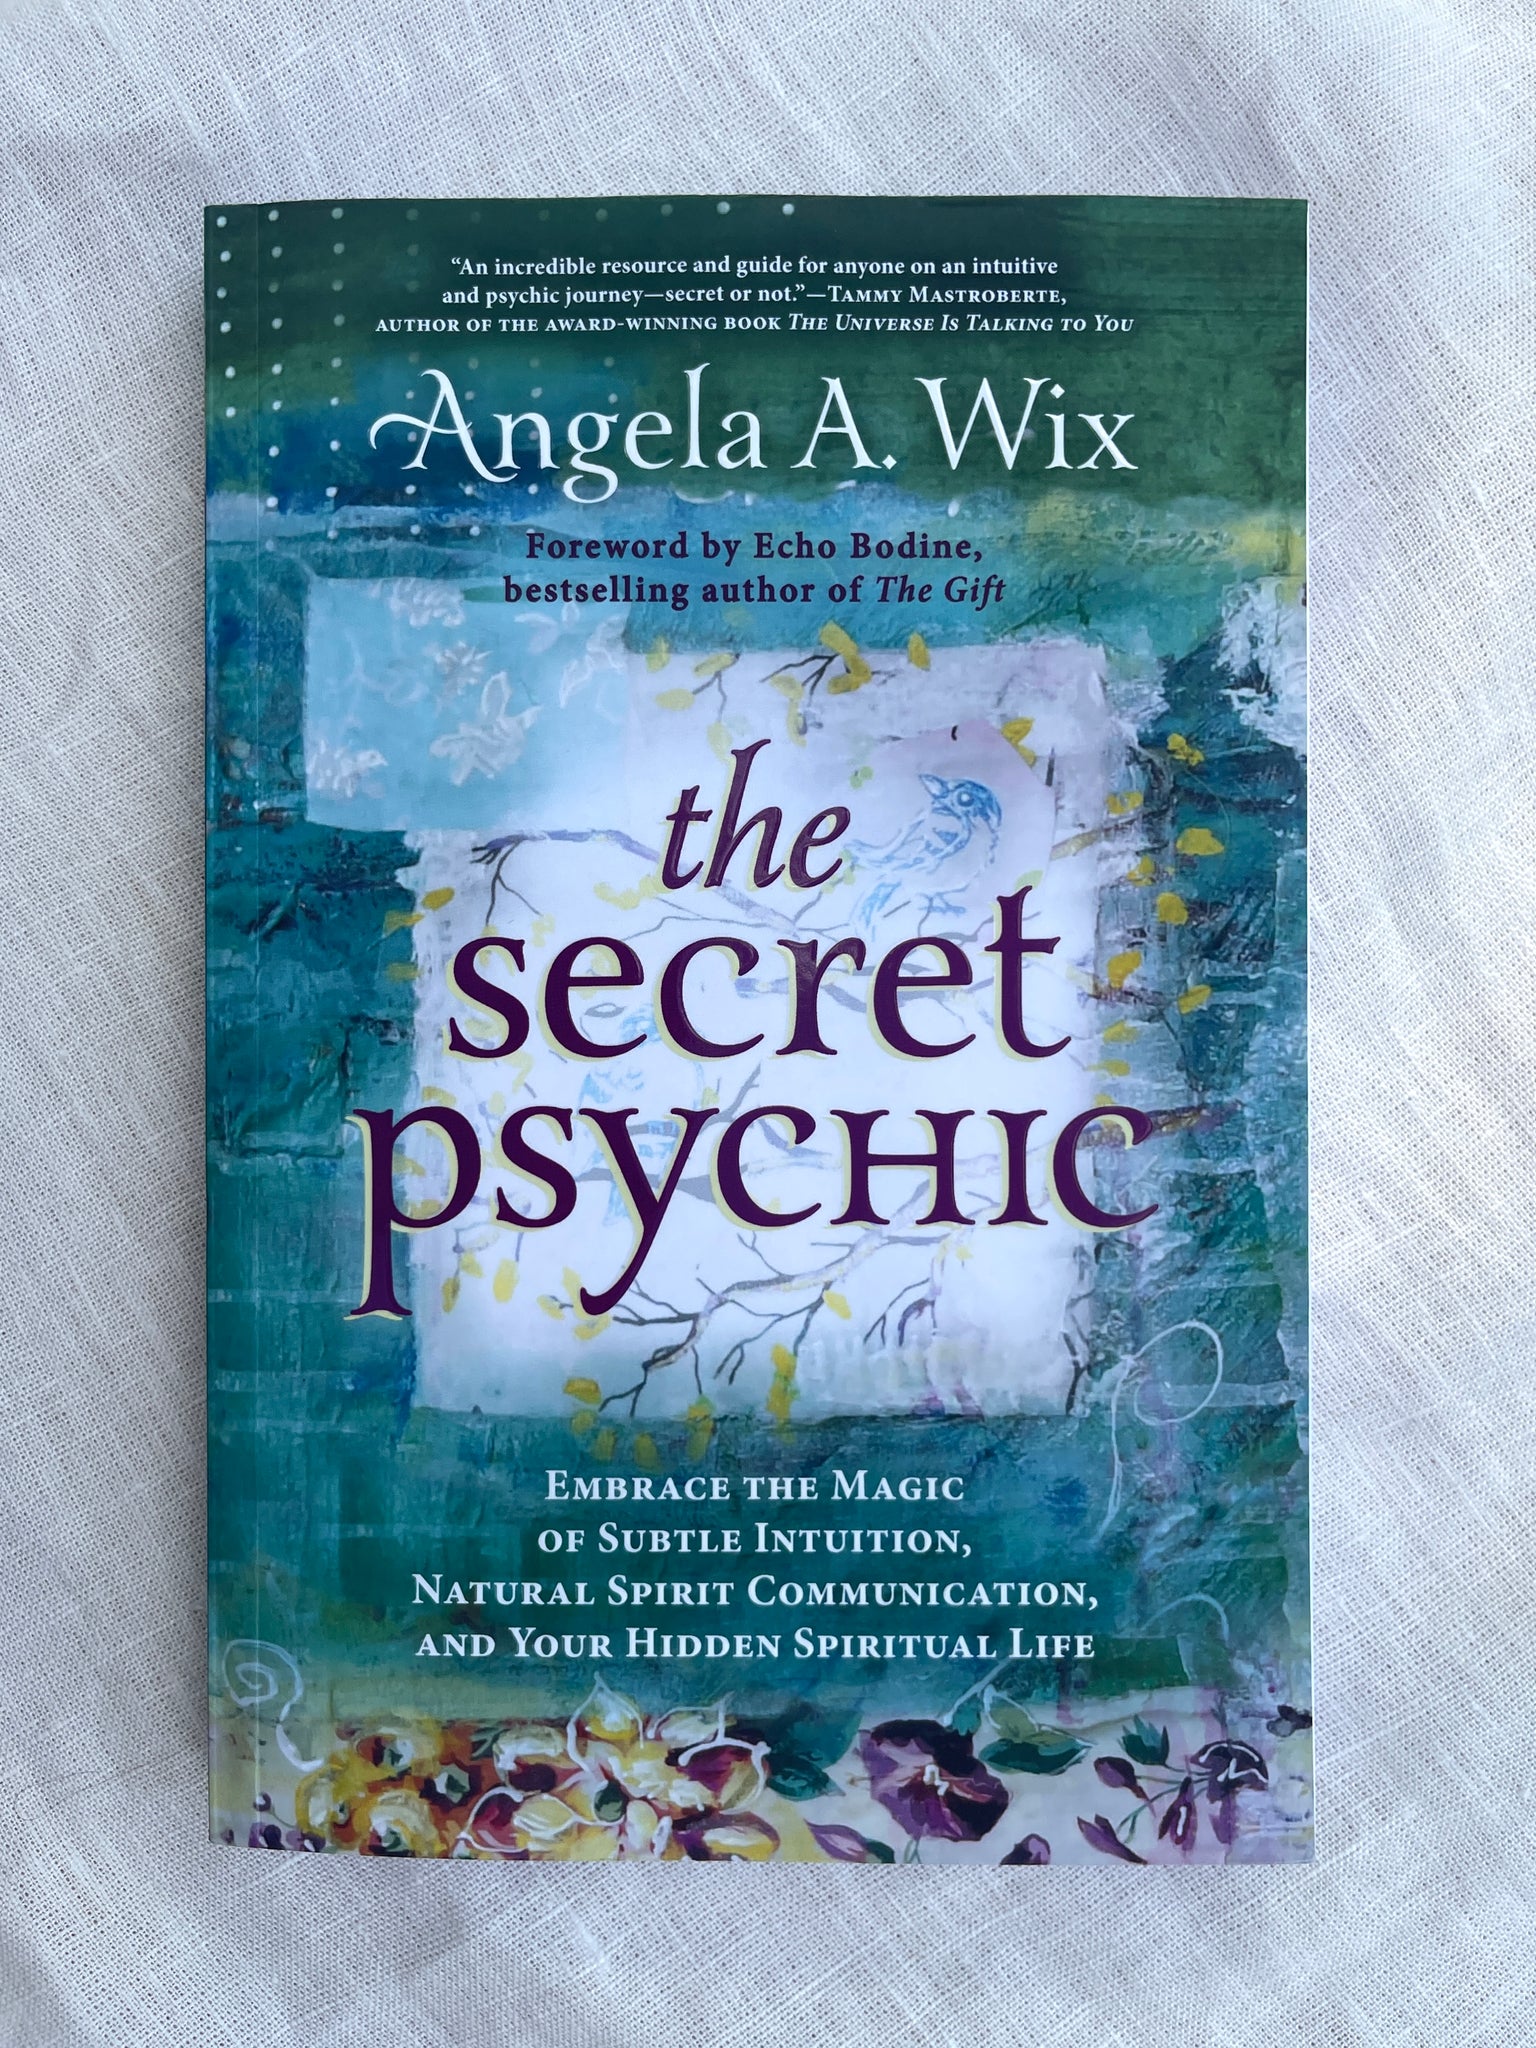 The Secret Psychic book embrace the magic of subtle intuition, natural spirit communication, and your hidden spiritual life by angela a wix